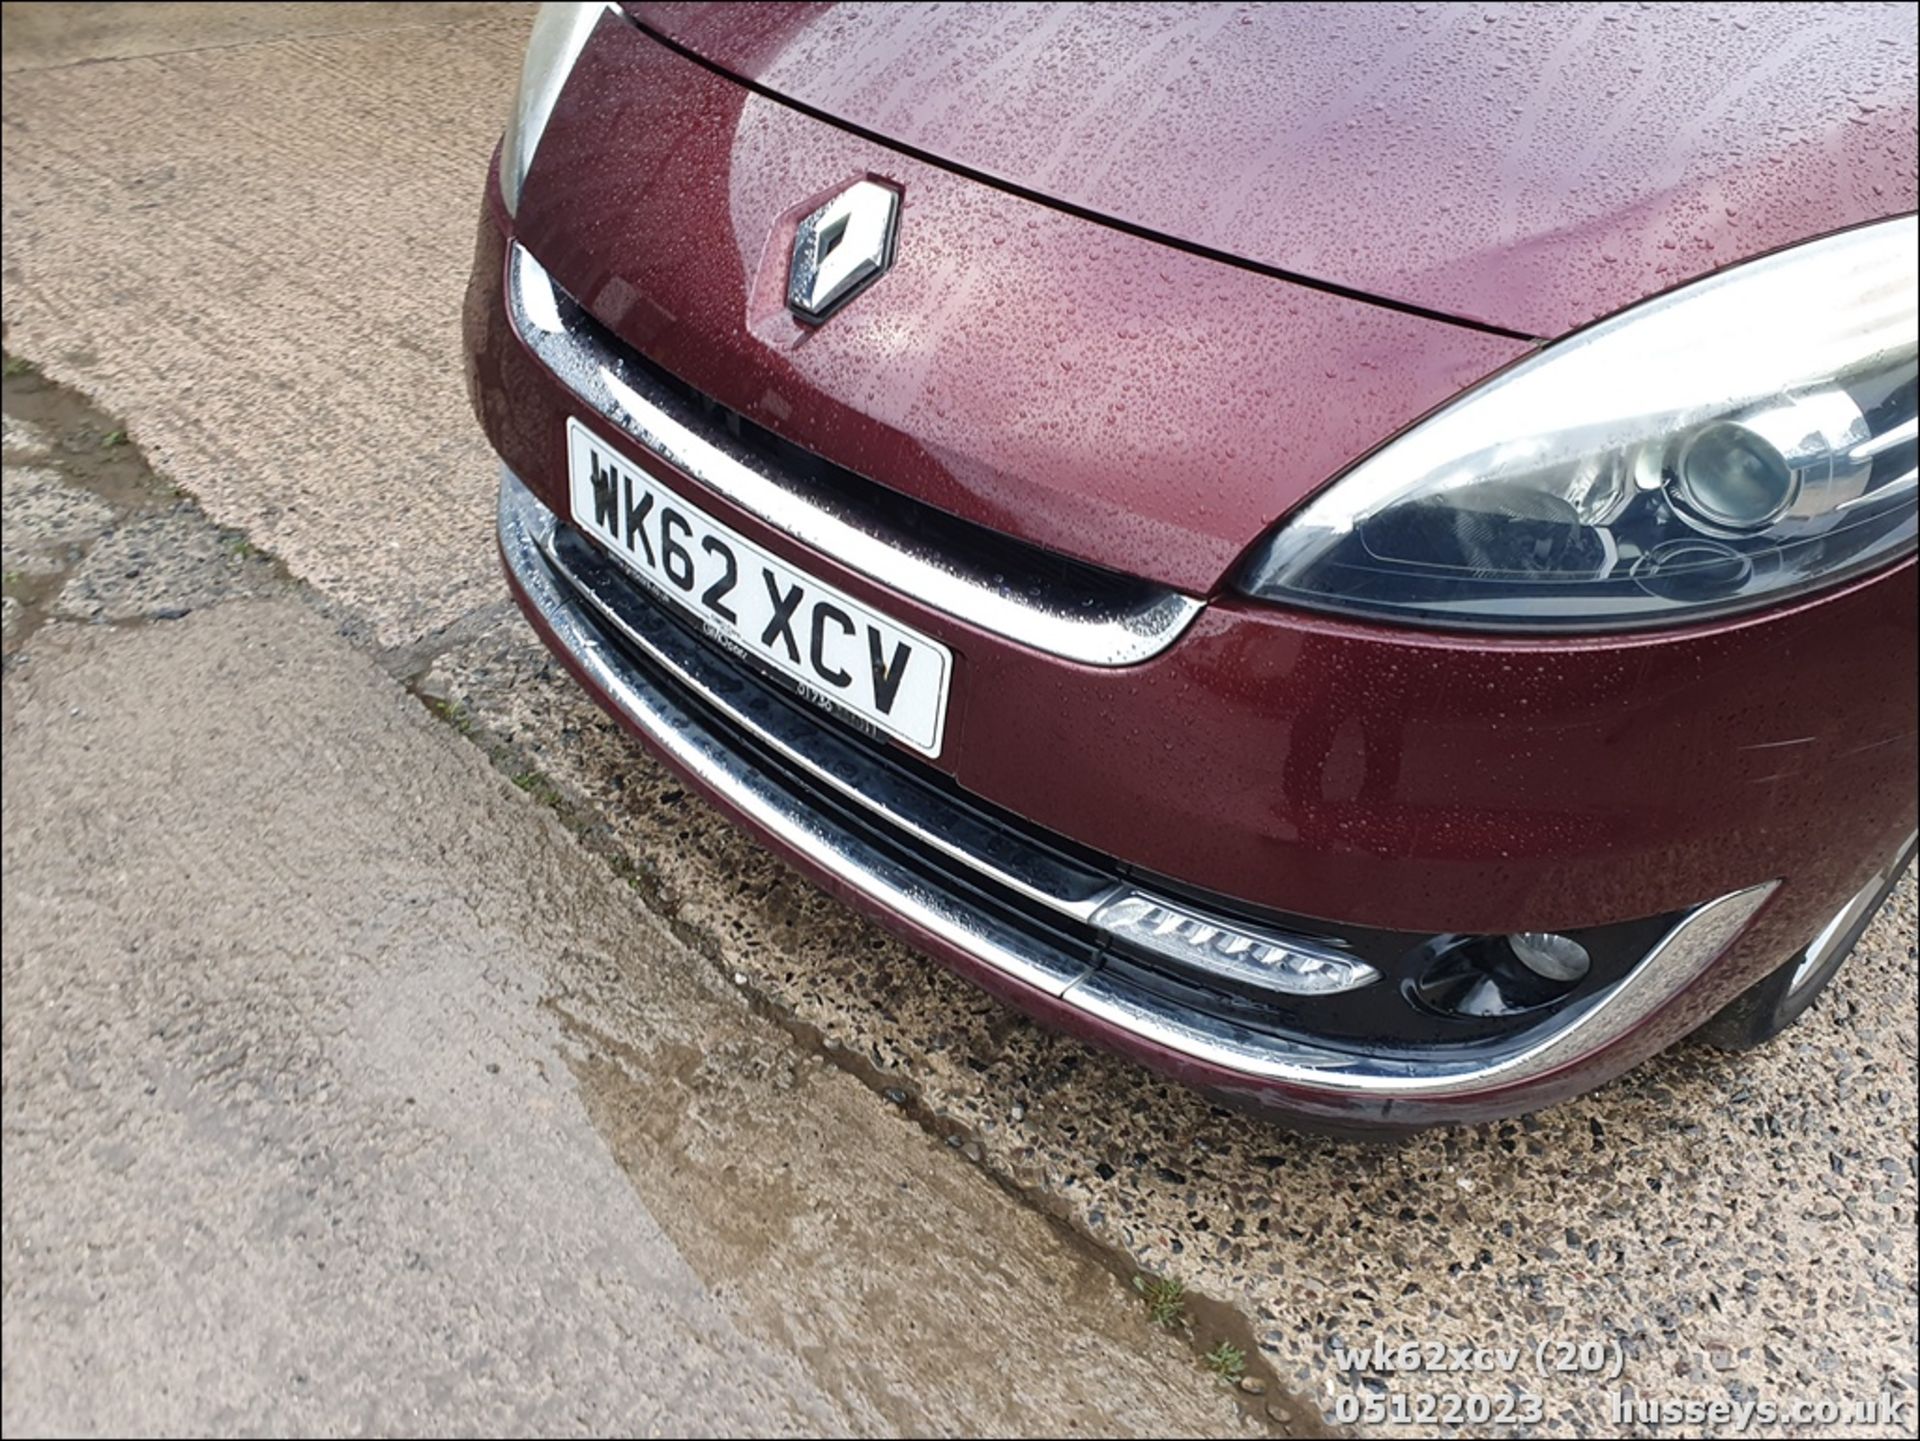 12/62 RENAULT G SCENIC D-QUETTLUXE NRG - 1598cc 5dr MPV (Red) - Image 21 of 53